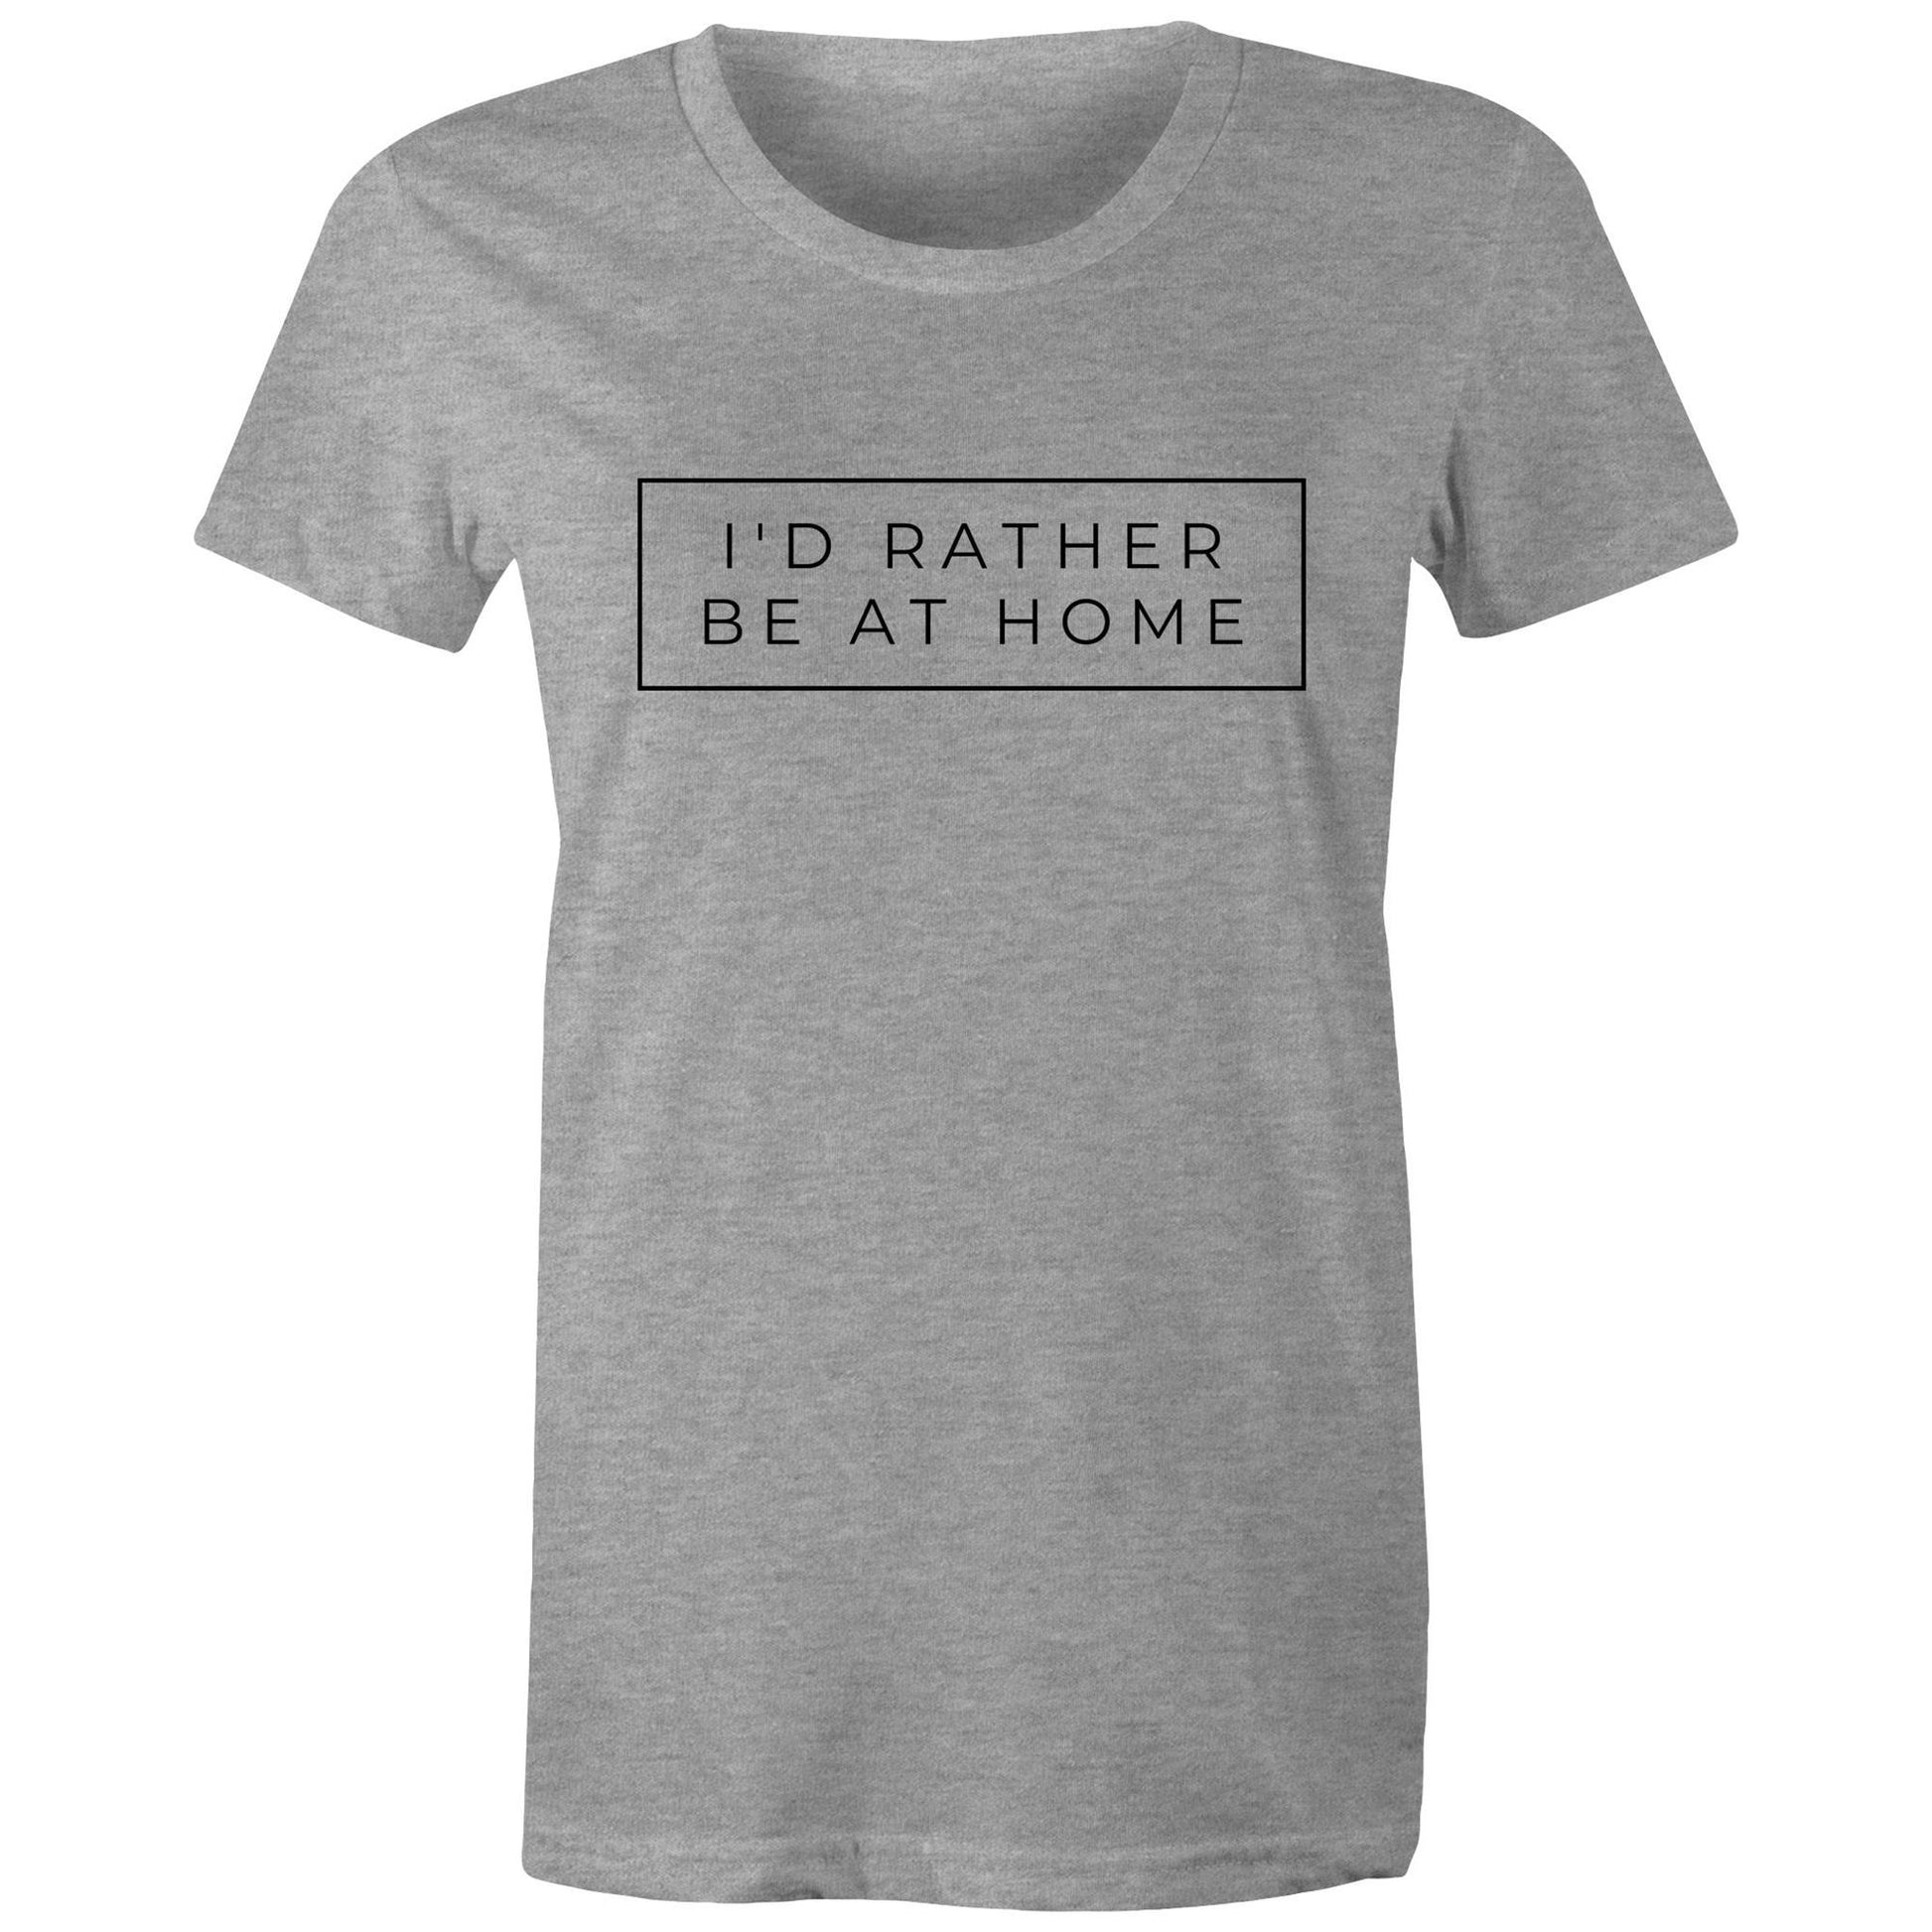 I'd Rather Be At Home - Womens T-shirt Grey Marle Womens T-shirt home